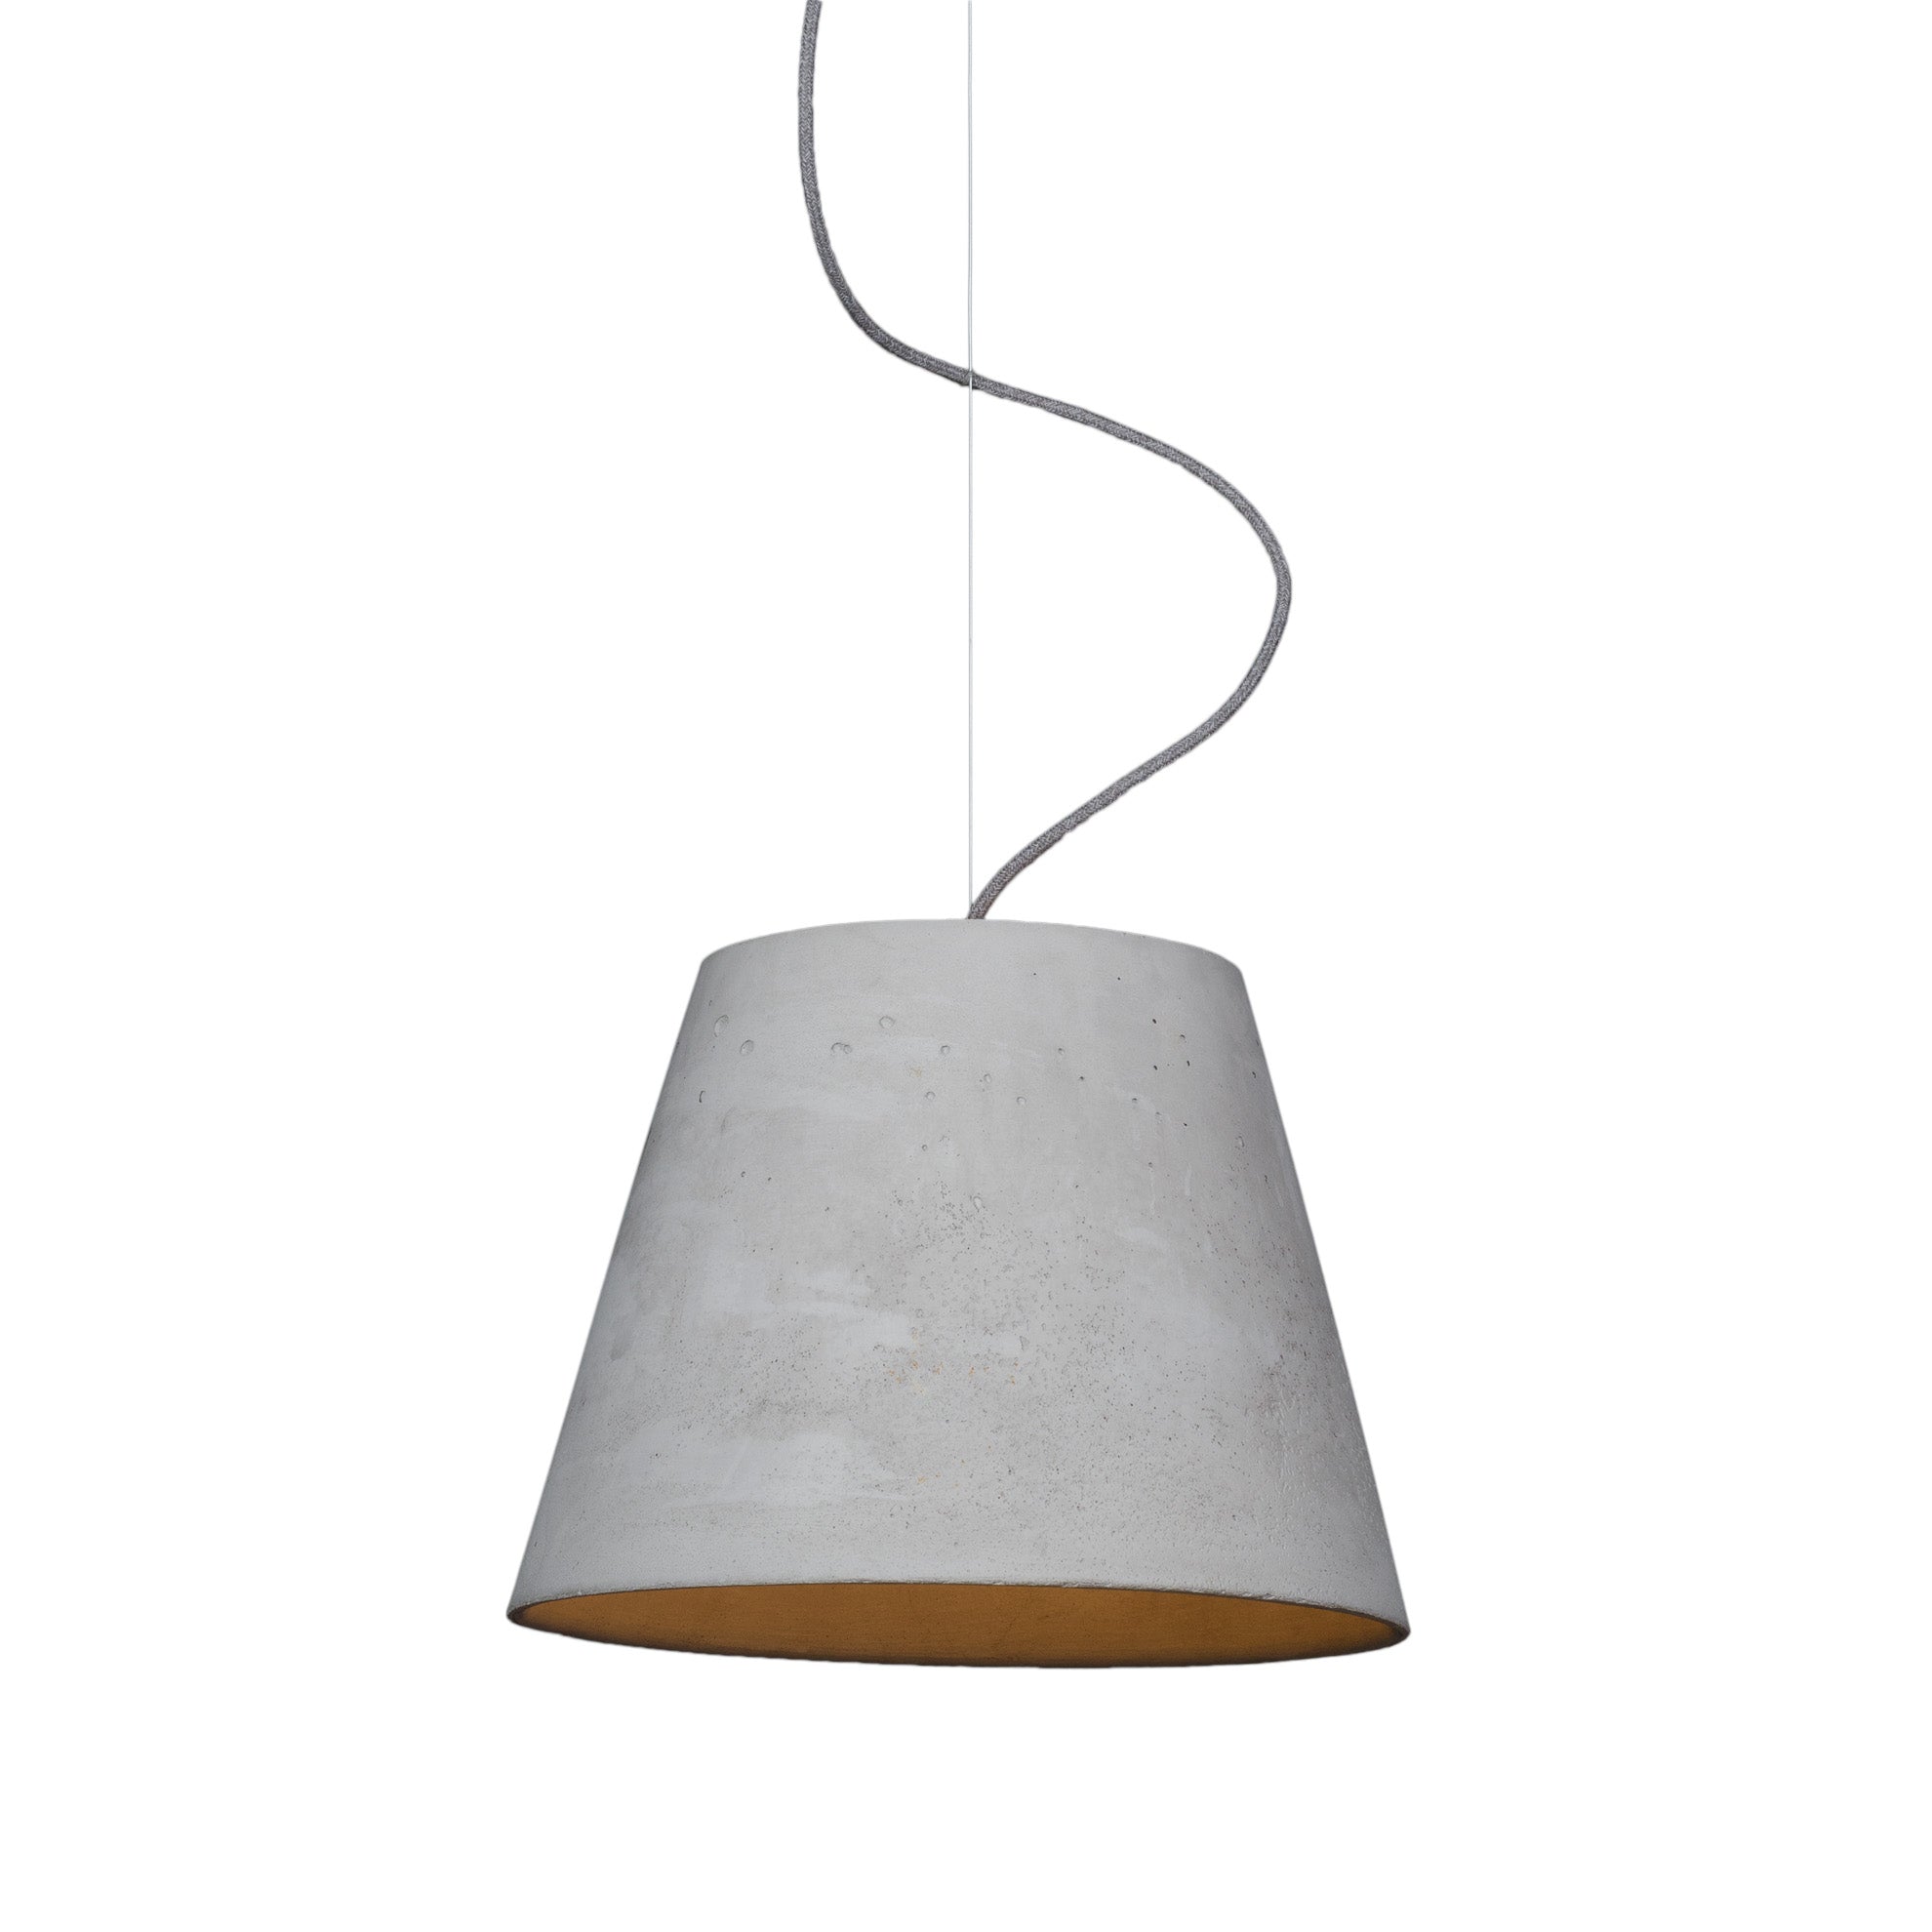 Kopa is an industrial lamp suitable for modern loft interiors. Manual cast lampshade made of concrete in a selected color. Thanks to this, each interior will gain a perfect shade that will fit into the prevailing decor. Metal finishing elements emphasize its factory character. Nickel stopwatch allows you to hang the lamp at any height that will meet every challenge. From the table in the dining room to the bar top of the kitchen. It works not only in home interiors, but also in commercial.